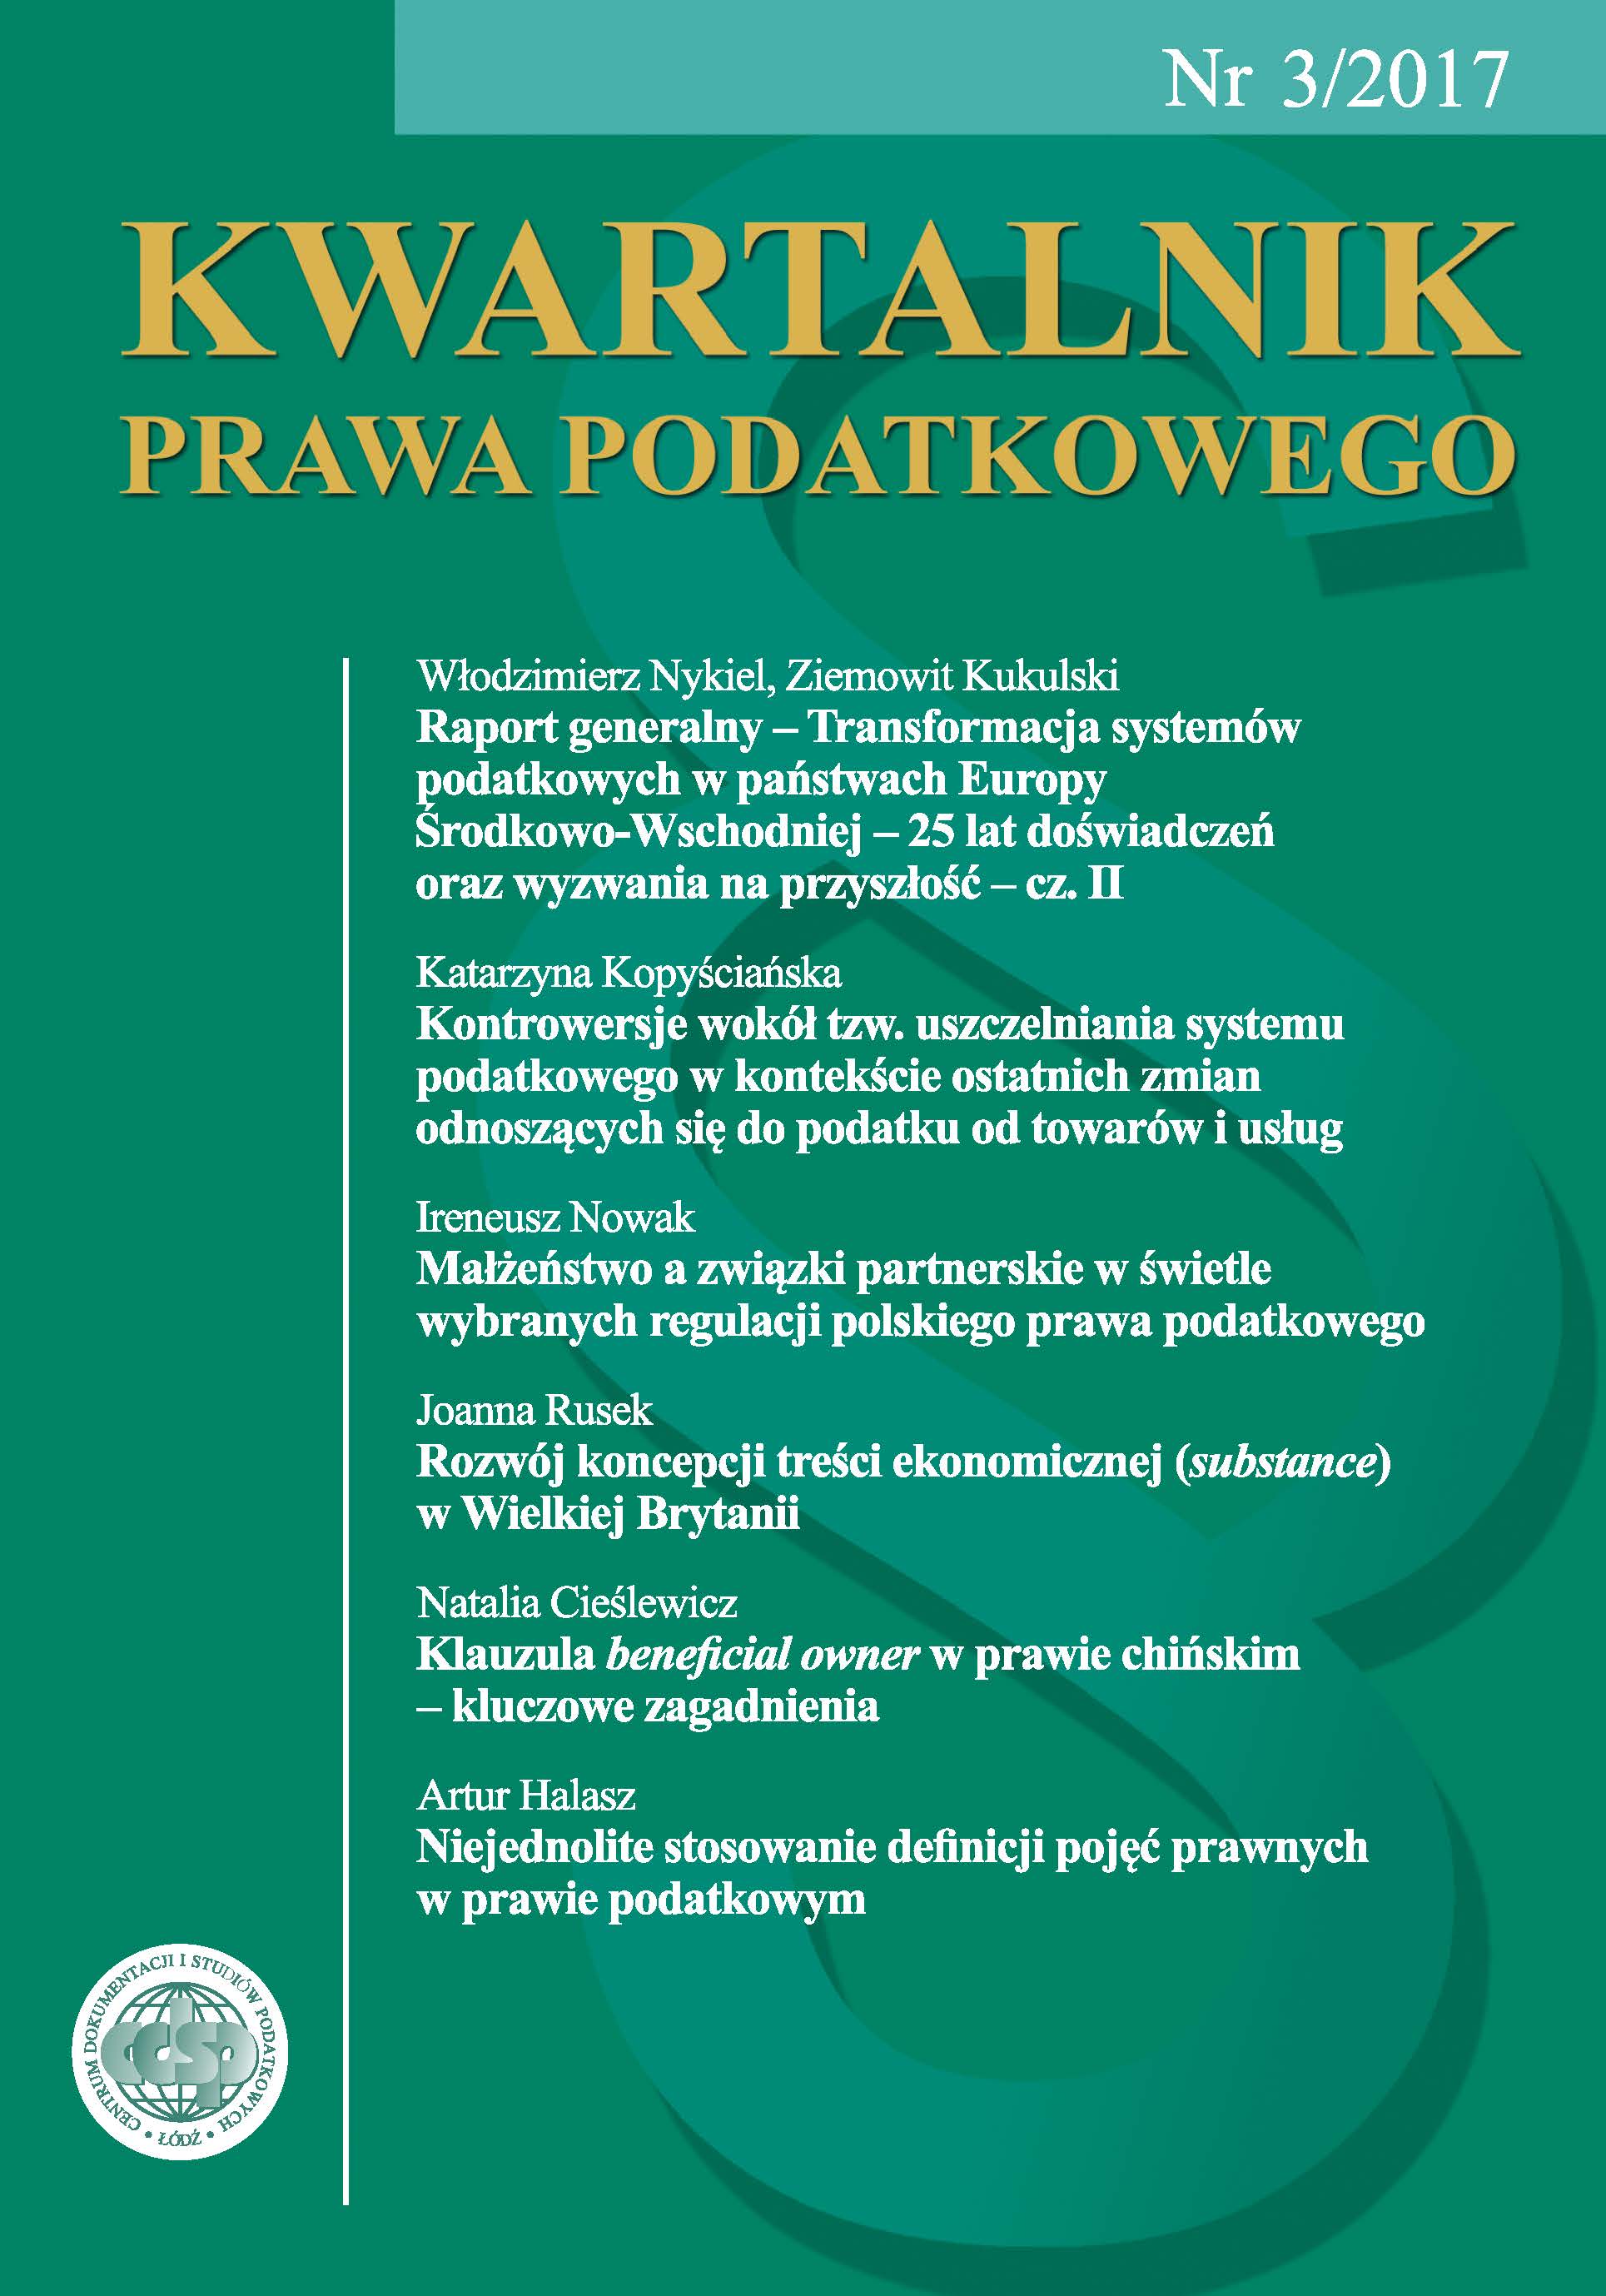 Marriage and partnerships in the light of selected regulations of Polish tax law Cover Image